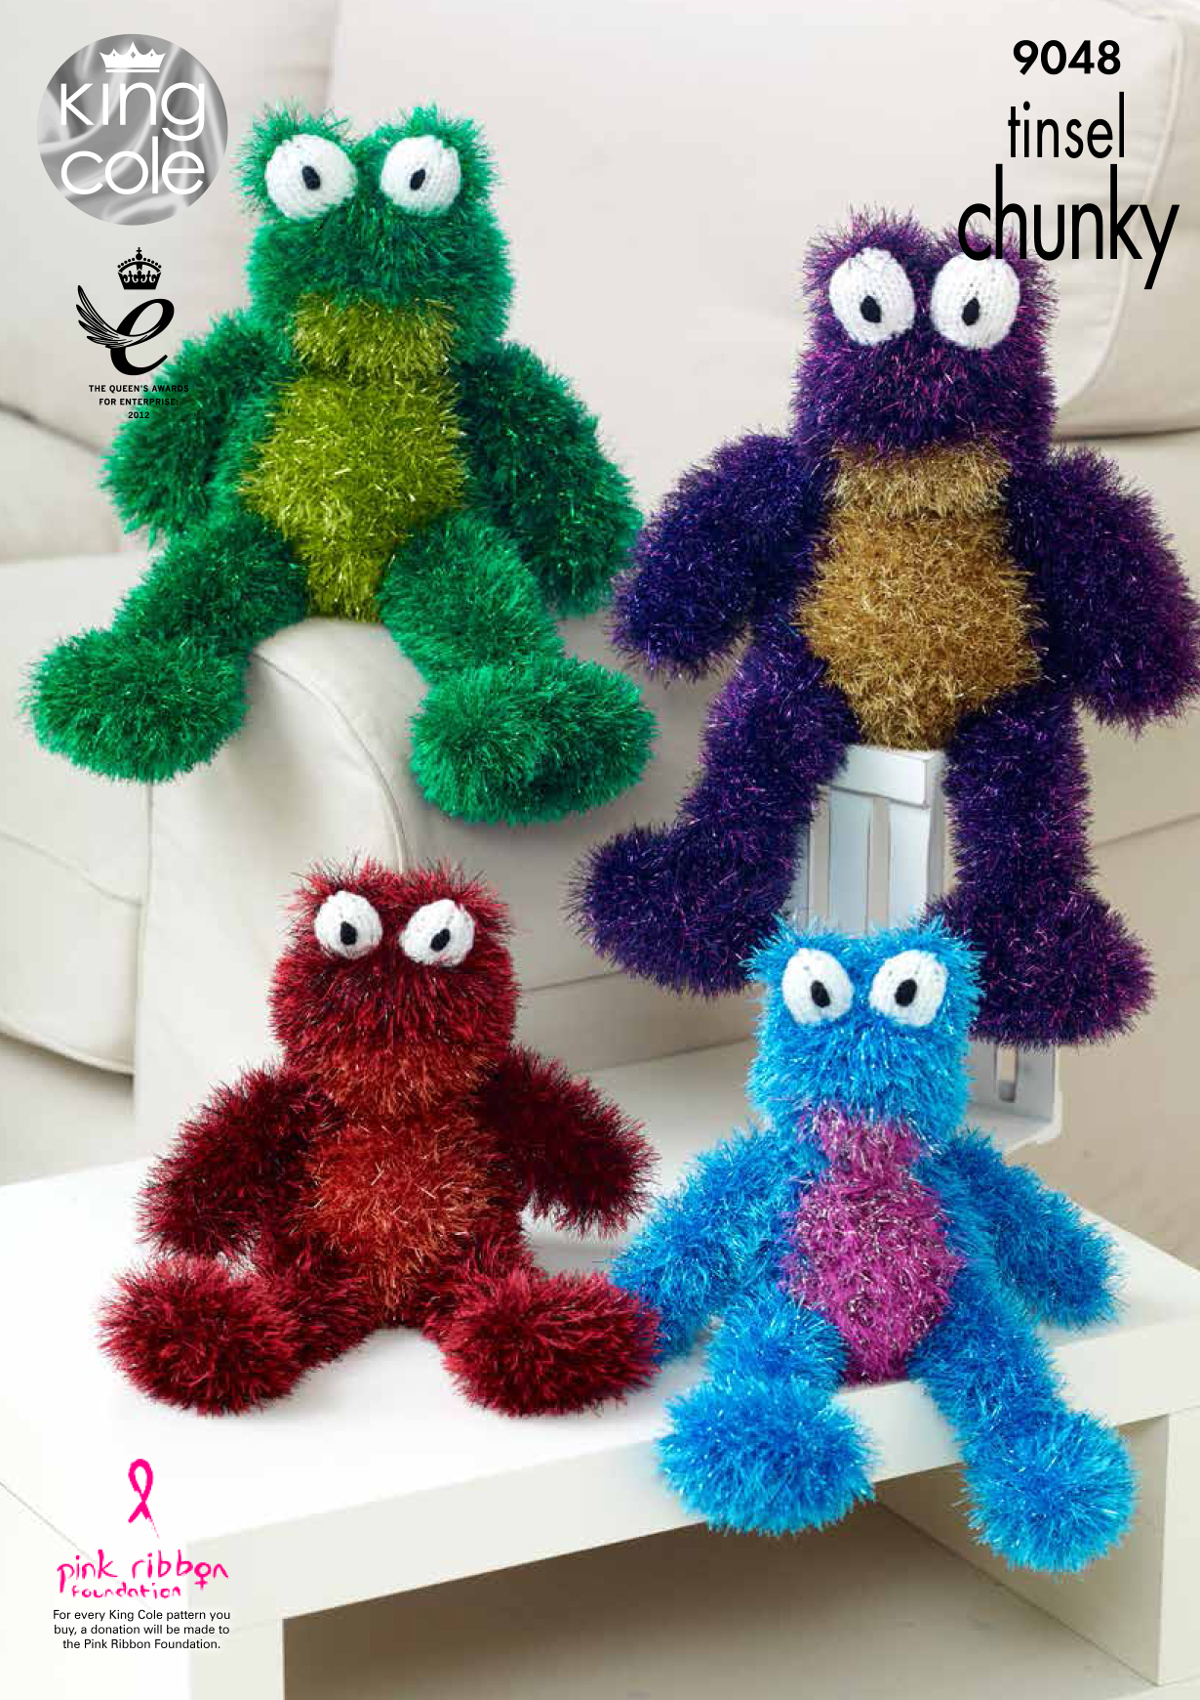 Knitting Patterns For Baby Toys Details About Tinsel Chunky Knitting Pattern Small Or Large Frog Animal Toy King Cole 9048